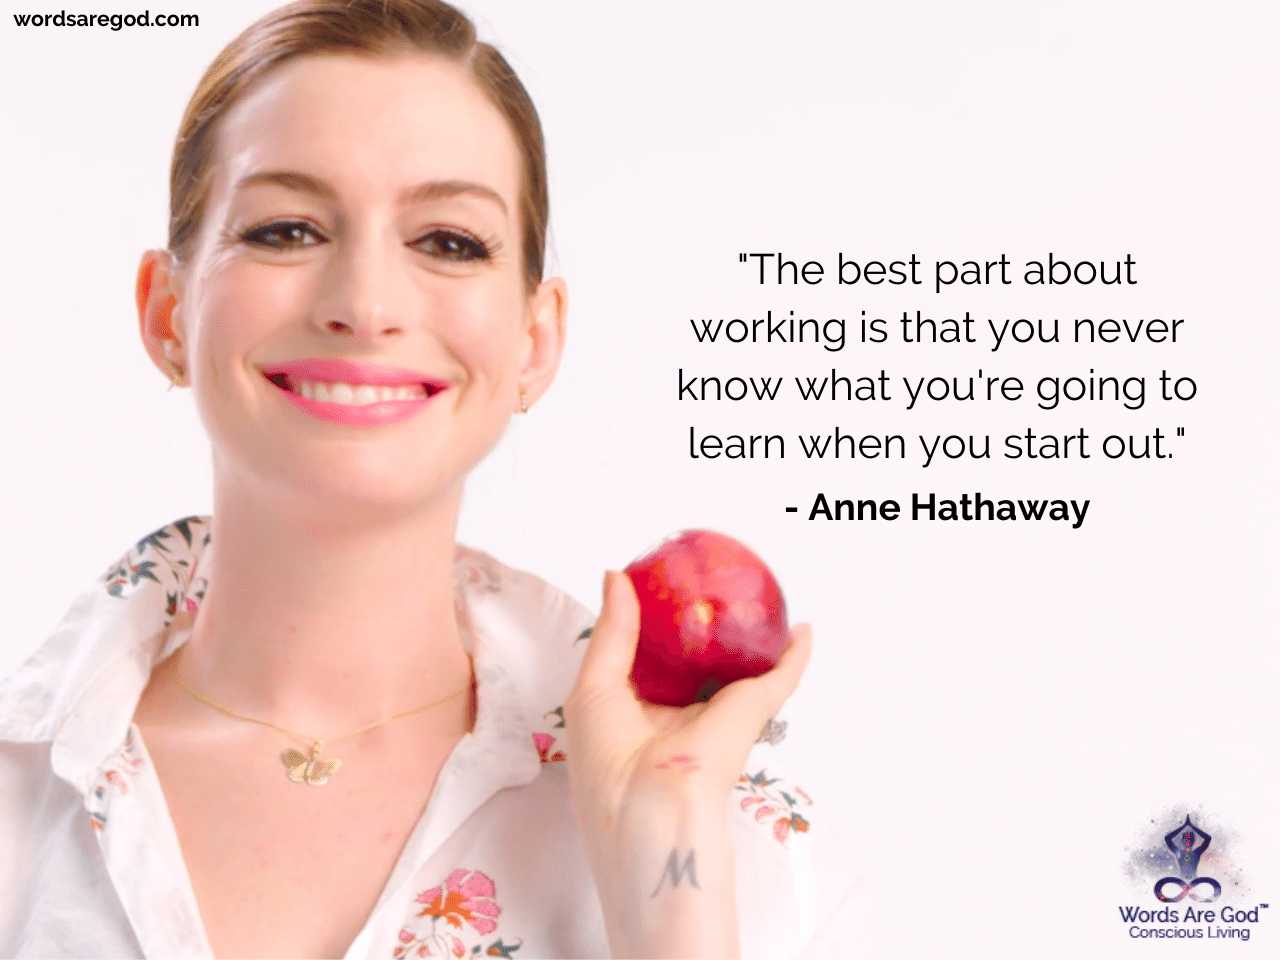 Anne Hathaway Life Quotes